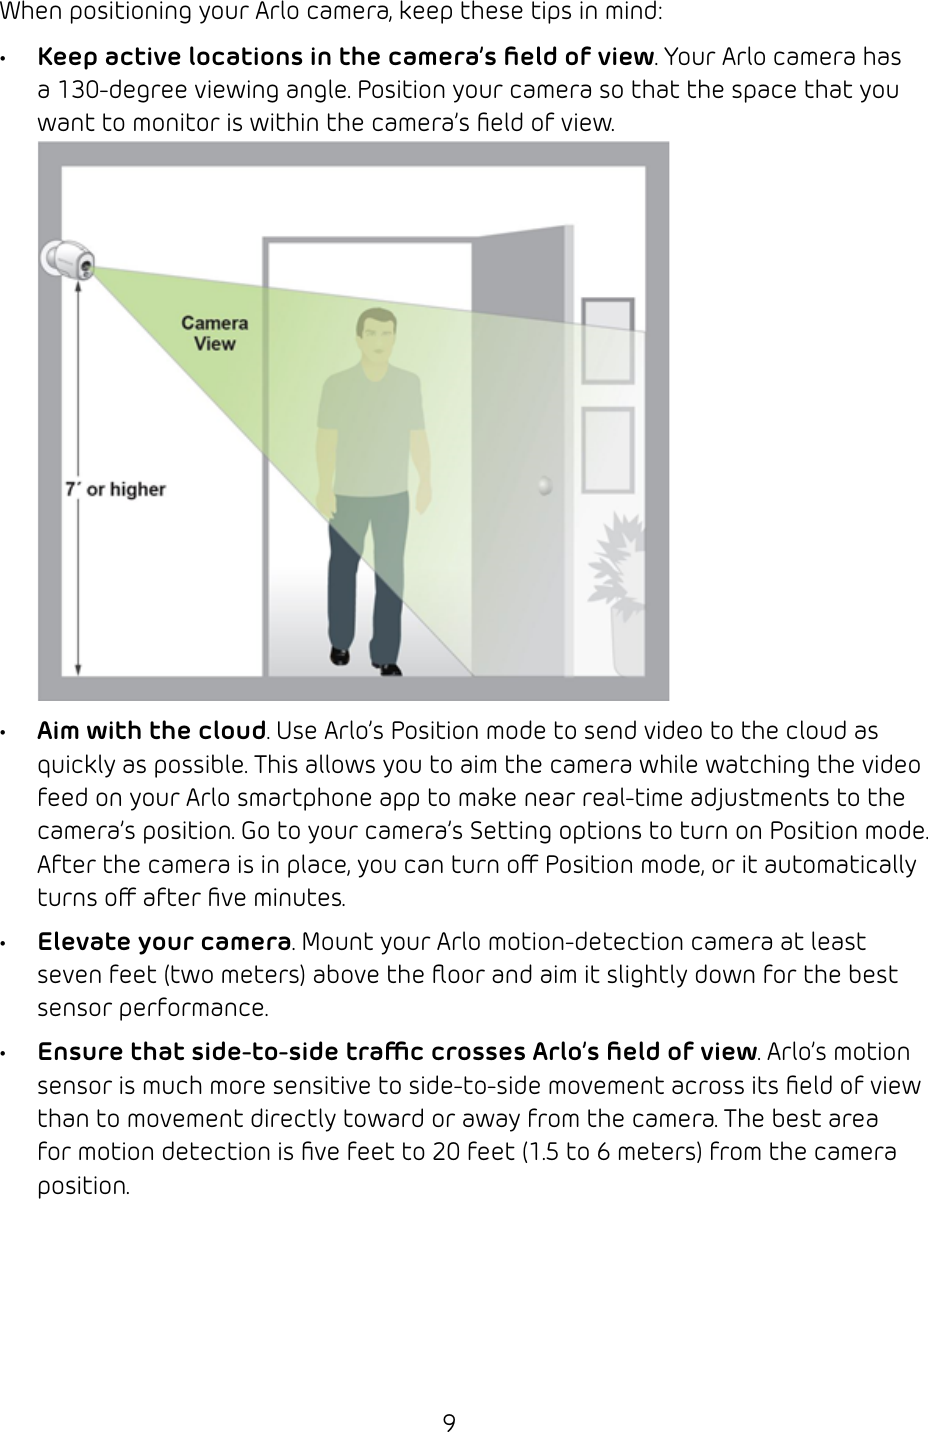 9When positioning your Arlo camera, keep these tips in mind: • Keep active locations in the camera’s ﬁeld of view. Your Arlo camera has a 130‑degree viewing angle. Position your camera so that the space that you want to monitor is within the camera’s ﬁeld of view. • Aim with the cloud. Use Arlo’s Position mode to send video to the cloud as quickly as possible. This allows you to aim the camera while watching the video feed on your Arlo smartphone app to make near real‑time adjustments to the camera’s position. Go to your camera’s Setting options to turn on Position mode. After the camera is in place, you can turn o Position mode, or it automatically turns o after ﬁve minutes. • Elevate your camera. Mount your Arlo motion‑detection camera at least seven feet (two meters) above the ﬂoor and aim it slightly down for the best sensor performance.• Ensure that side-to-side trac crosses Arlo’s ﬁeld of view. Arlo’s motion sensor is much more sensitive to side‑to‑side movement across its ﬁeld of view than to movement directly toward or away from the camera. The best area for motion detection is ﬁve feet to 20 feet (1.5 to 6 meters) from the camera position. 